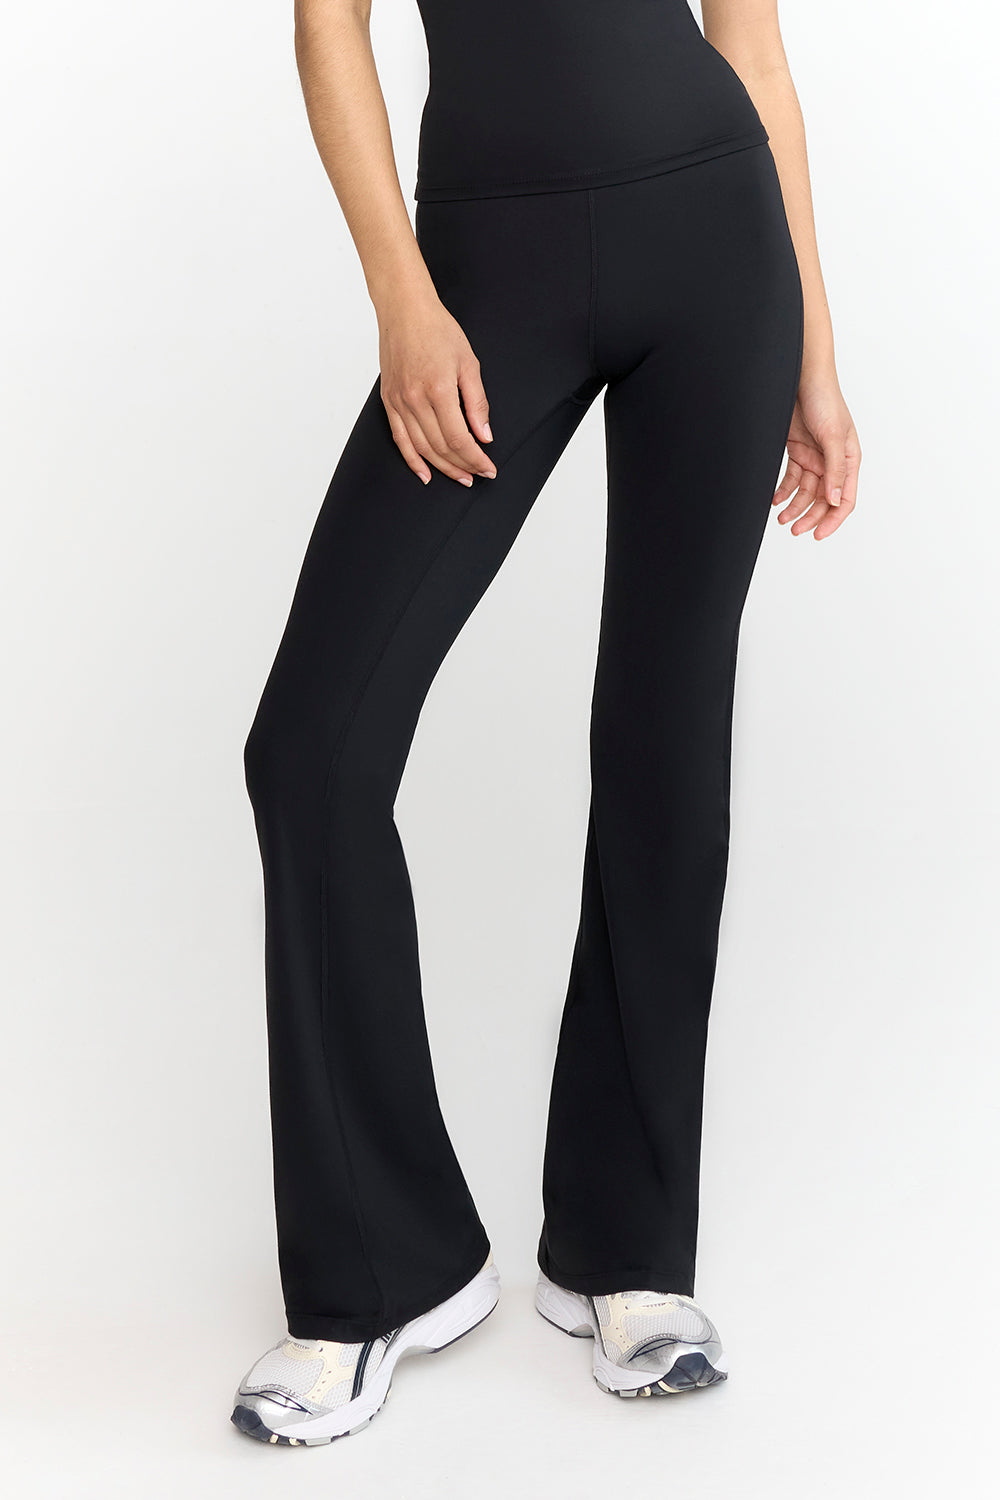 TALA SkinLuxe High Waisted Flared Legging Review - Gymfluencers